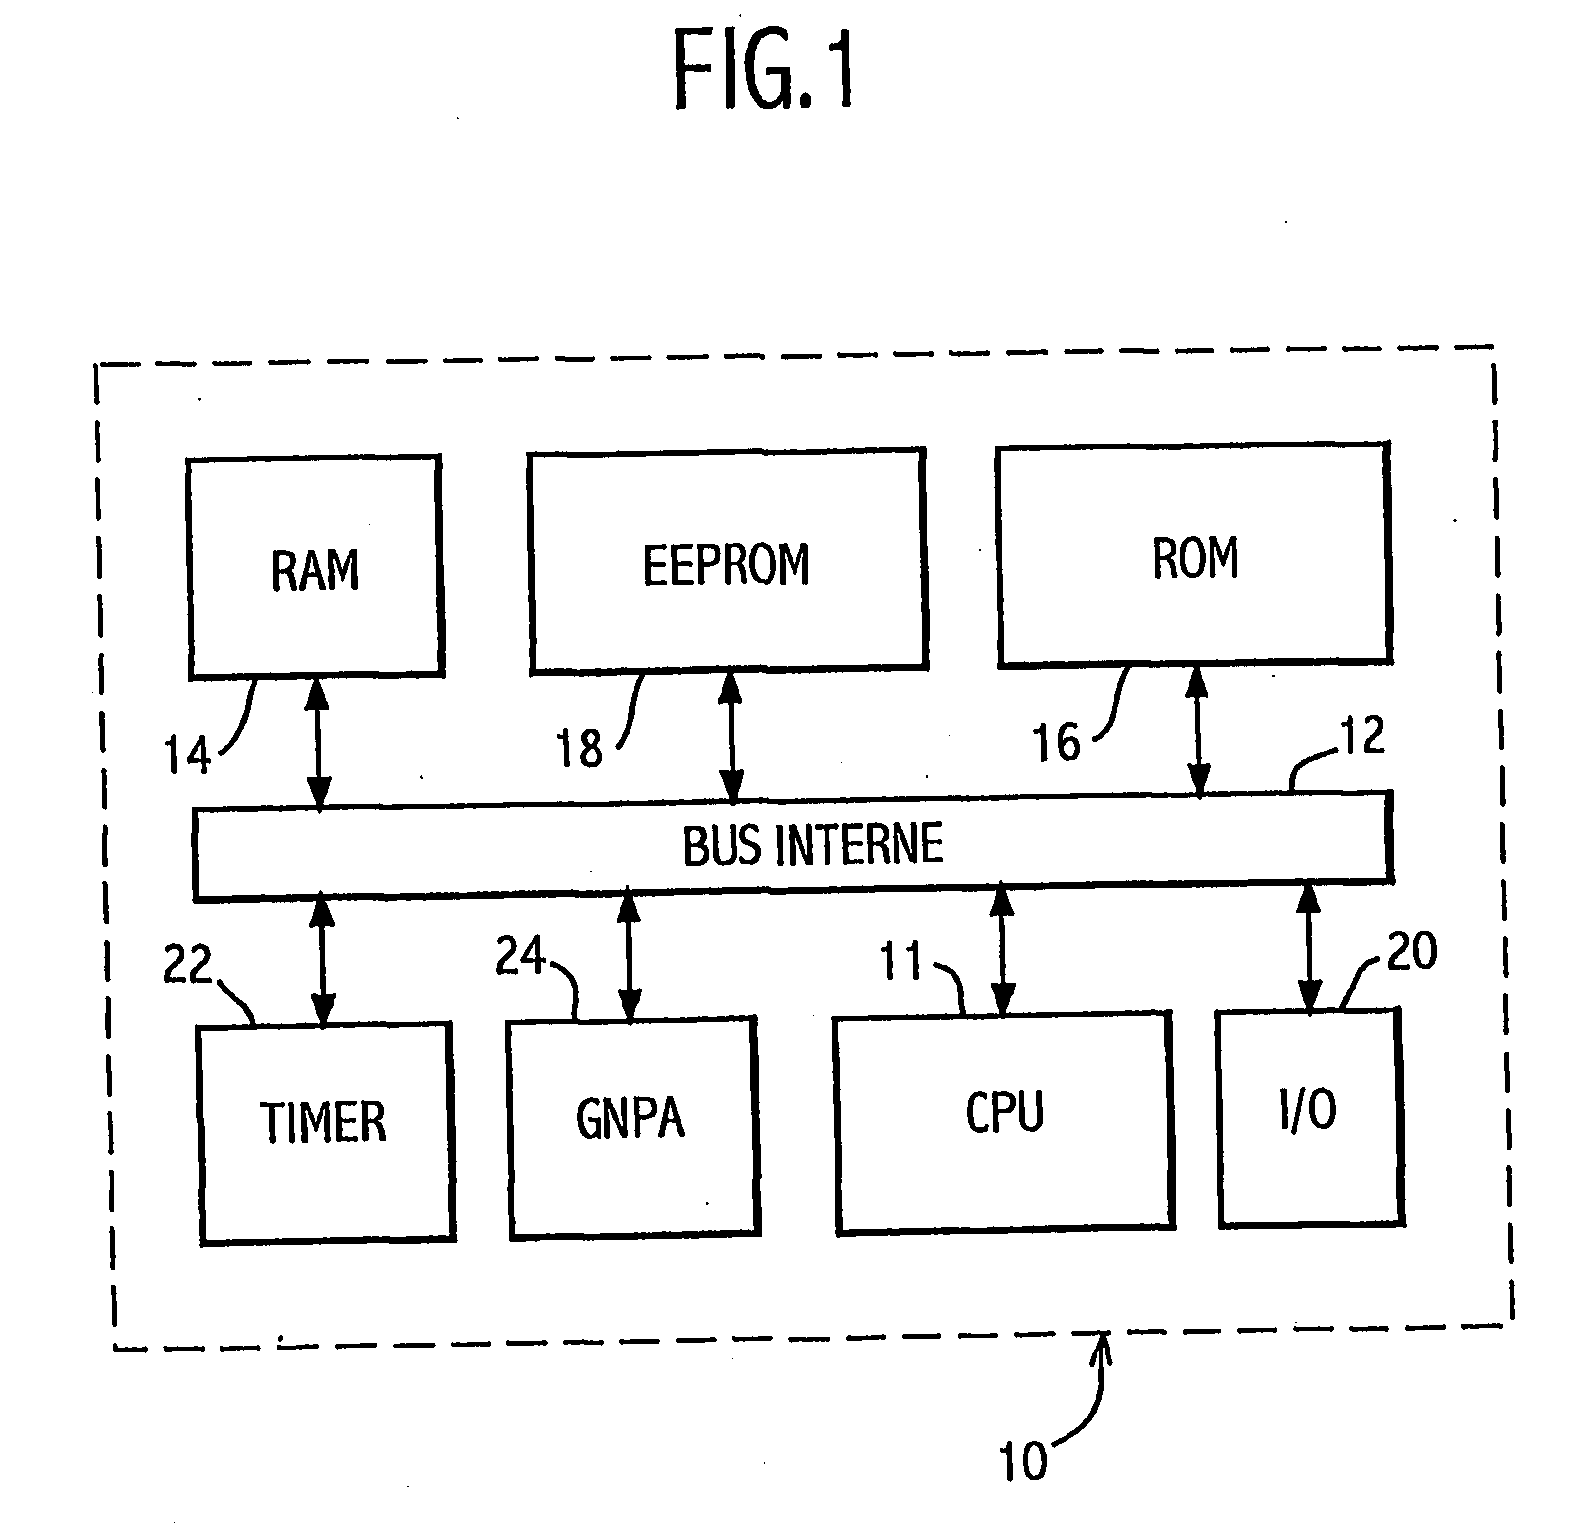 Method for Protecting a Logic or Mathematical operator Installed in an Electronic Module with a Microprocessor, as well as the Associated Embarked Electronic Module and the System